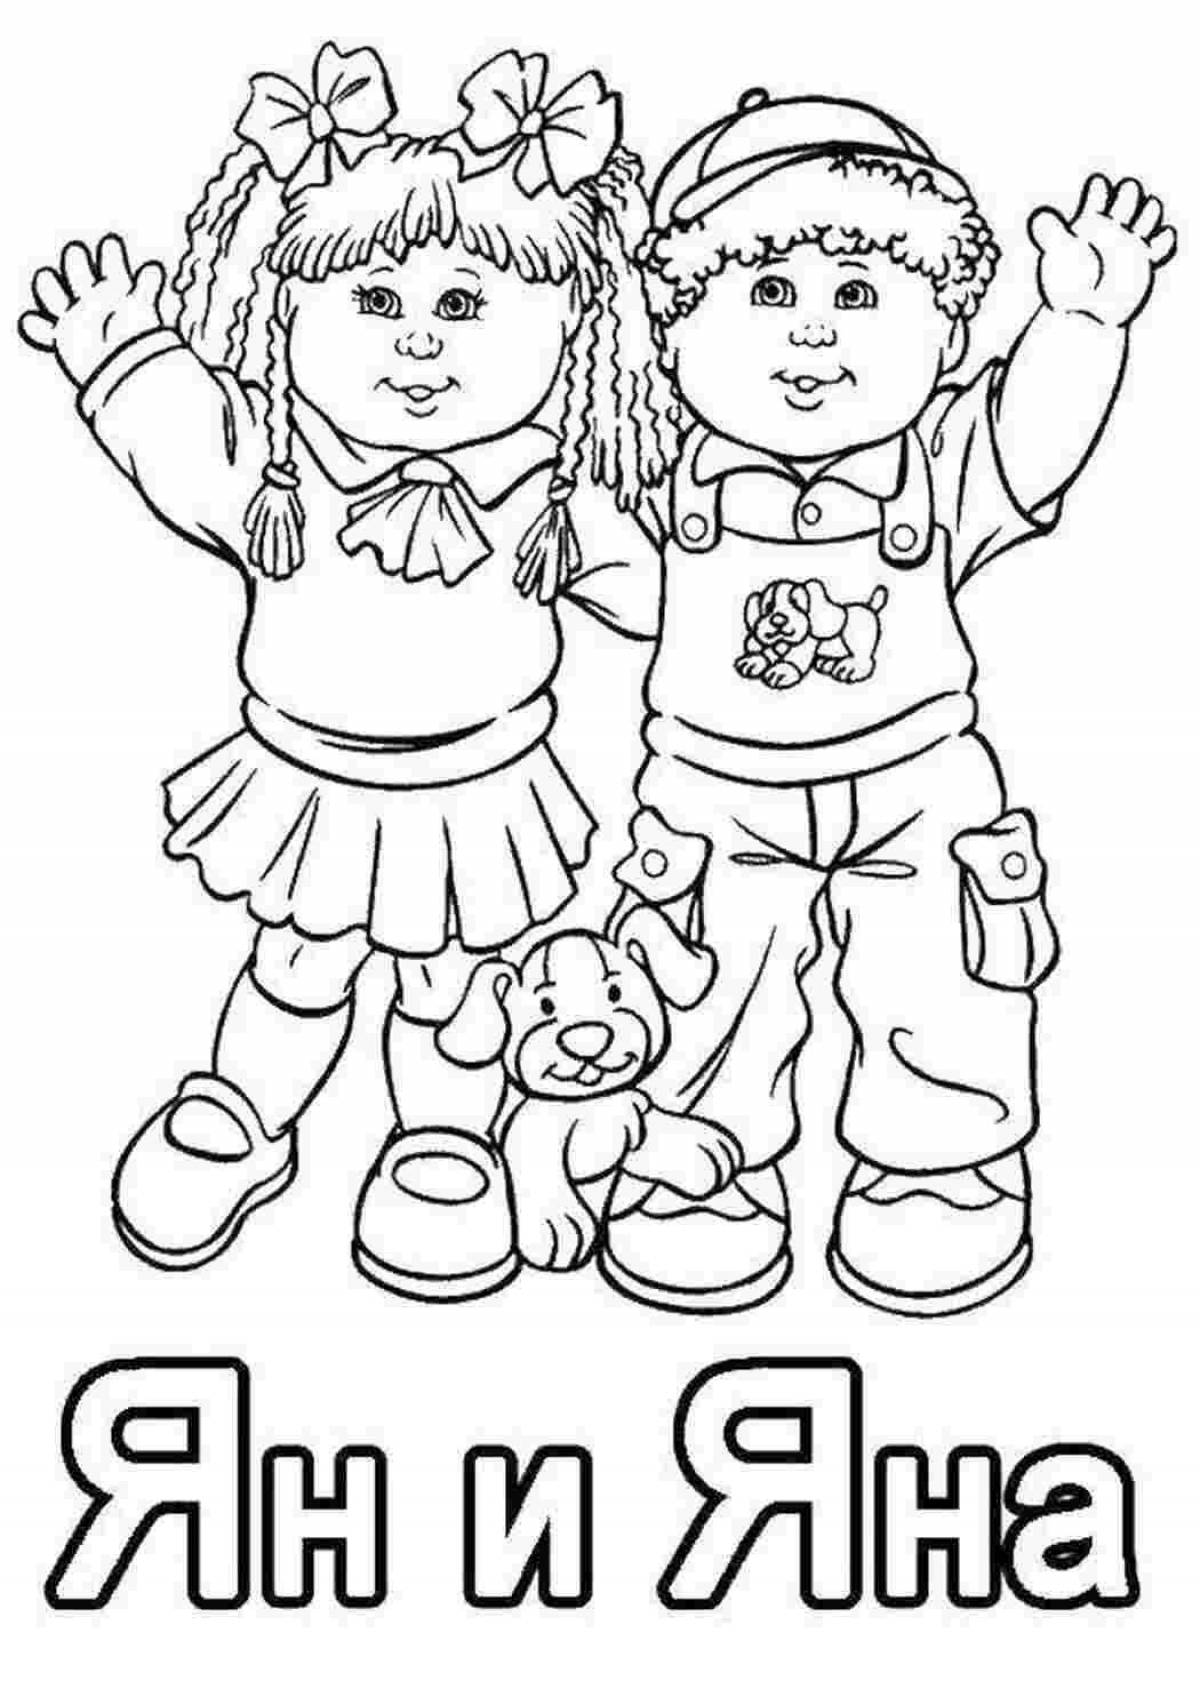 Crazy Children's Rights Coloring Page